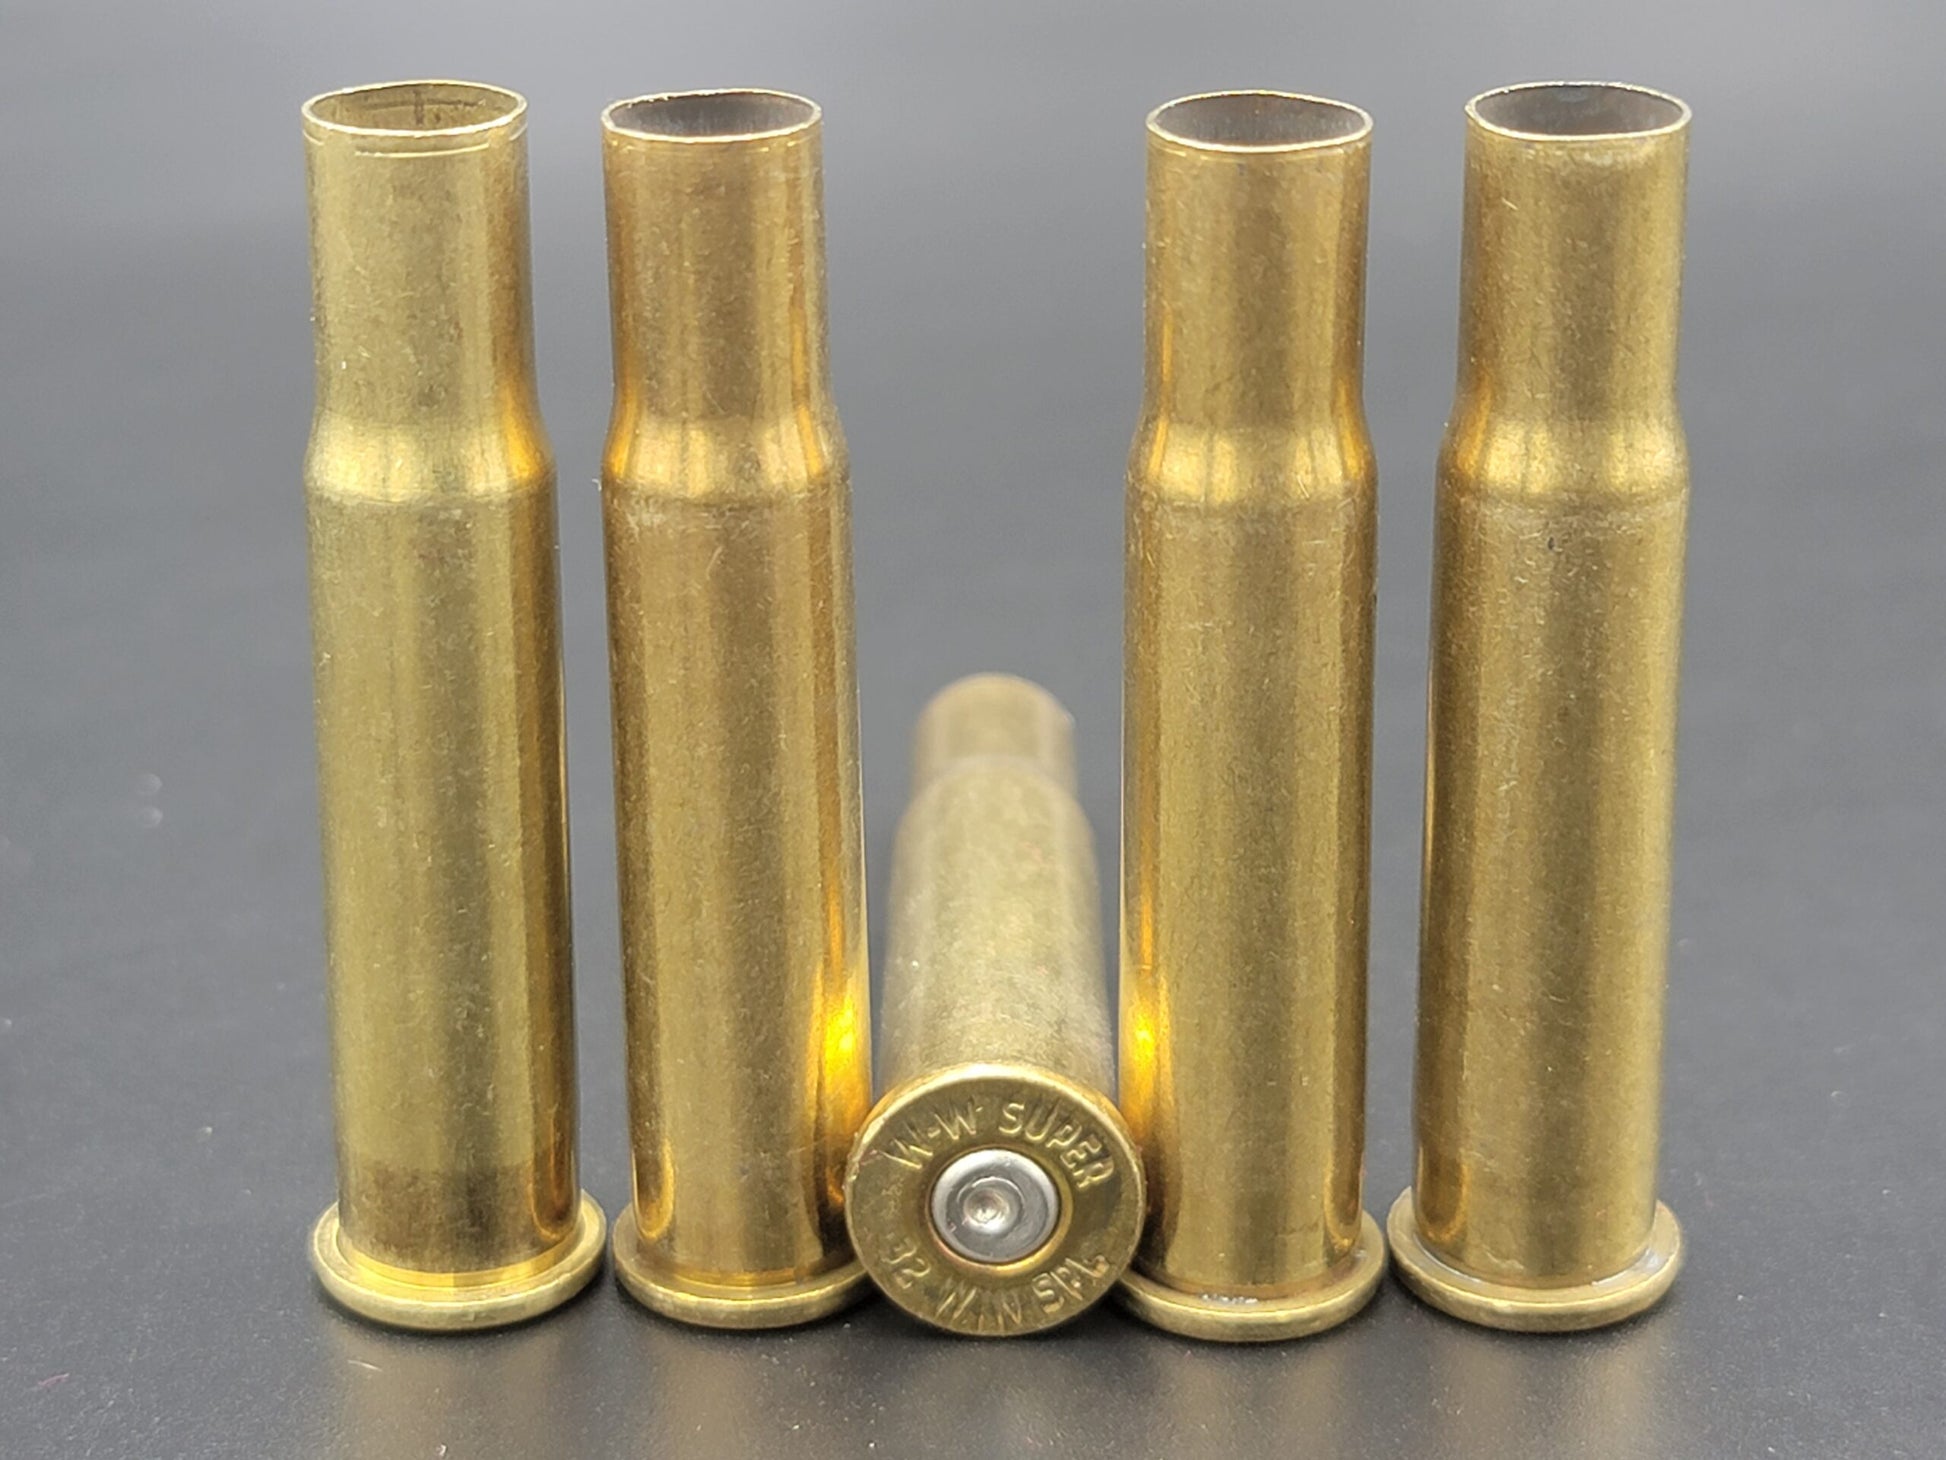 32 Win Special once fired rifle brass. Hand sorted from reputable indoor/military ranges for reloading. Reliable spent casings for precision shooting.